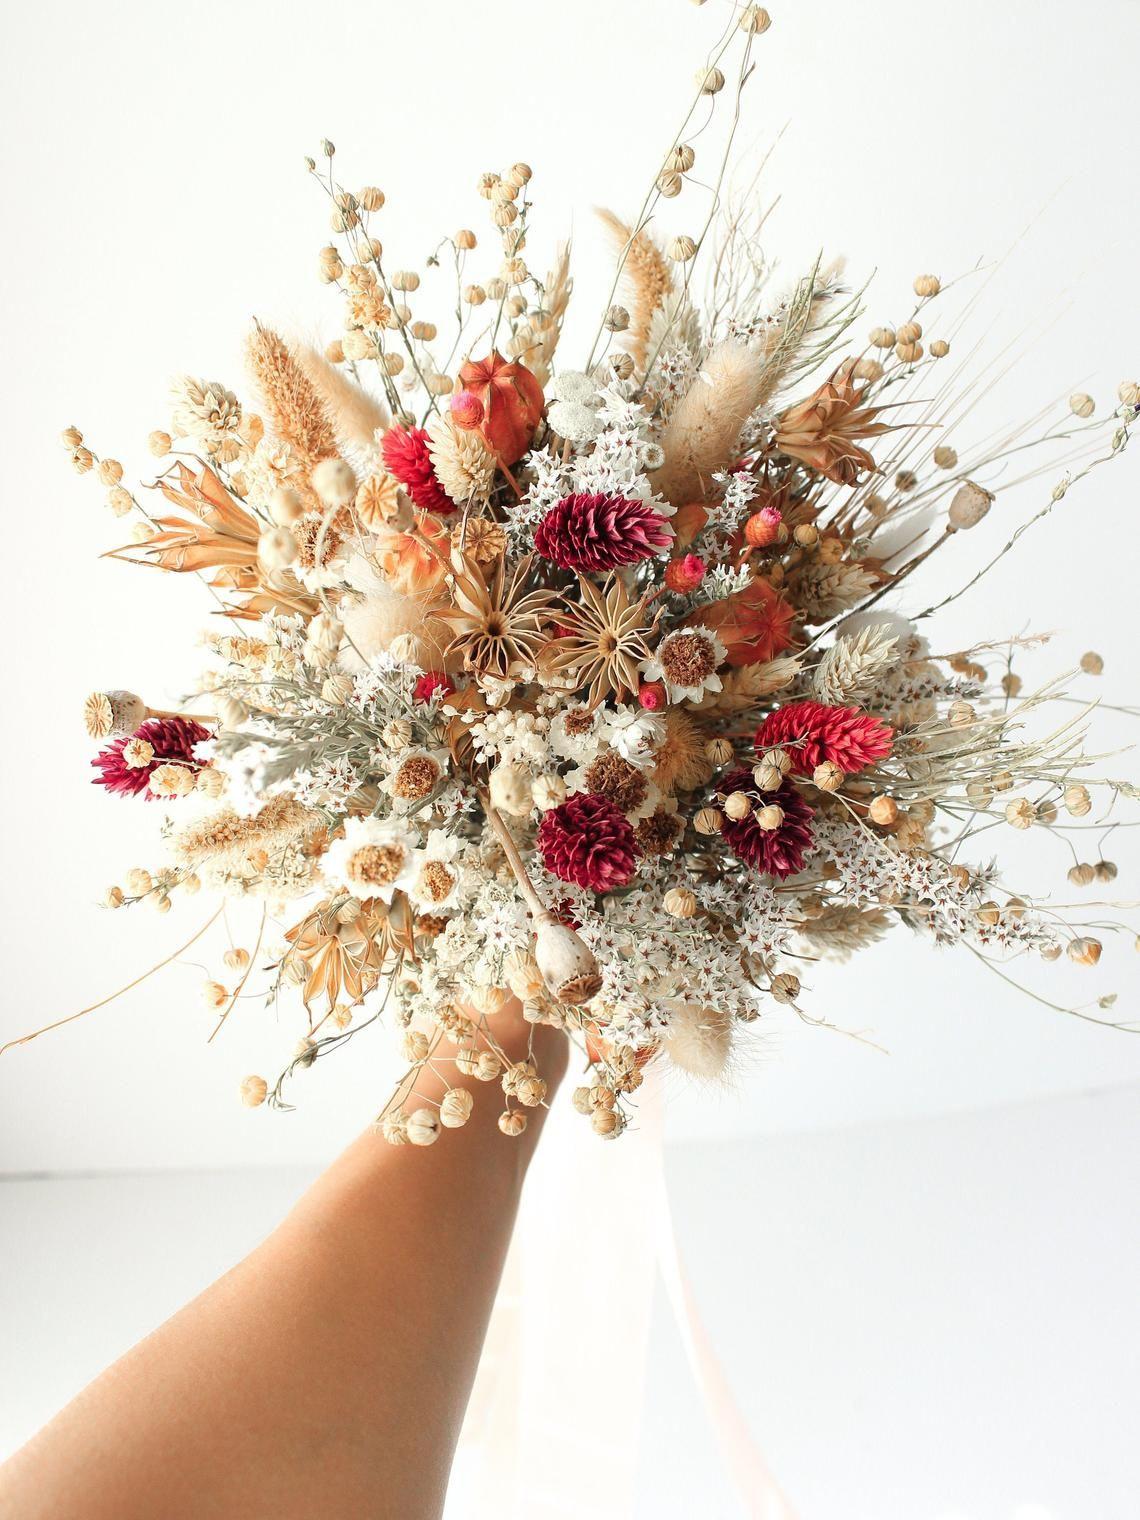 29 Wildflower Bouquet Ideas for Whimsical Brides - hitched.co.uk